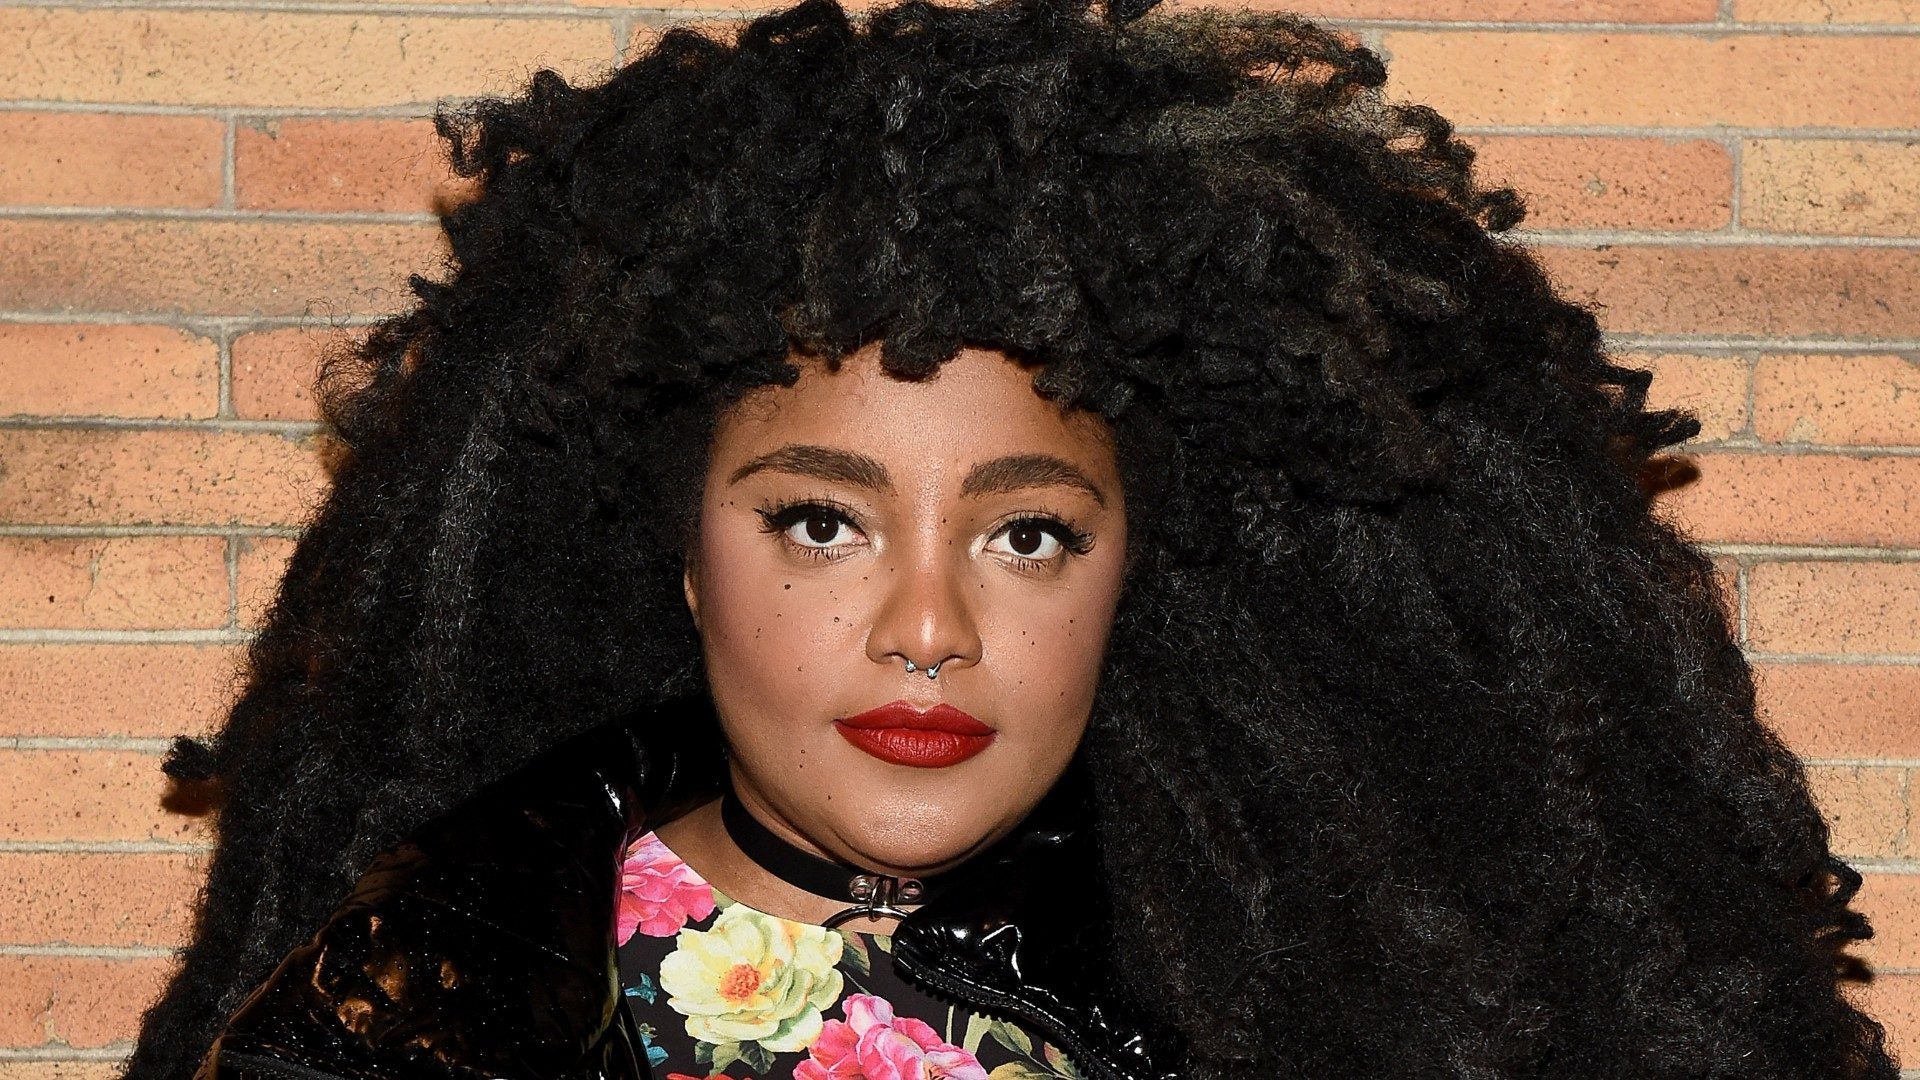 Danielle Brooks, TK Wonder, Joan Smalls And Other Celebrity Beauty Slays This Week